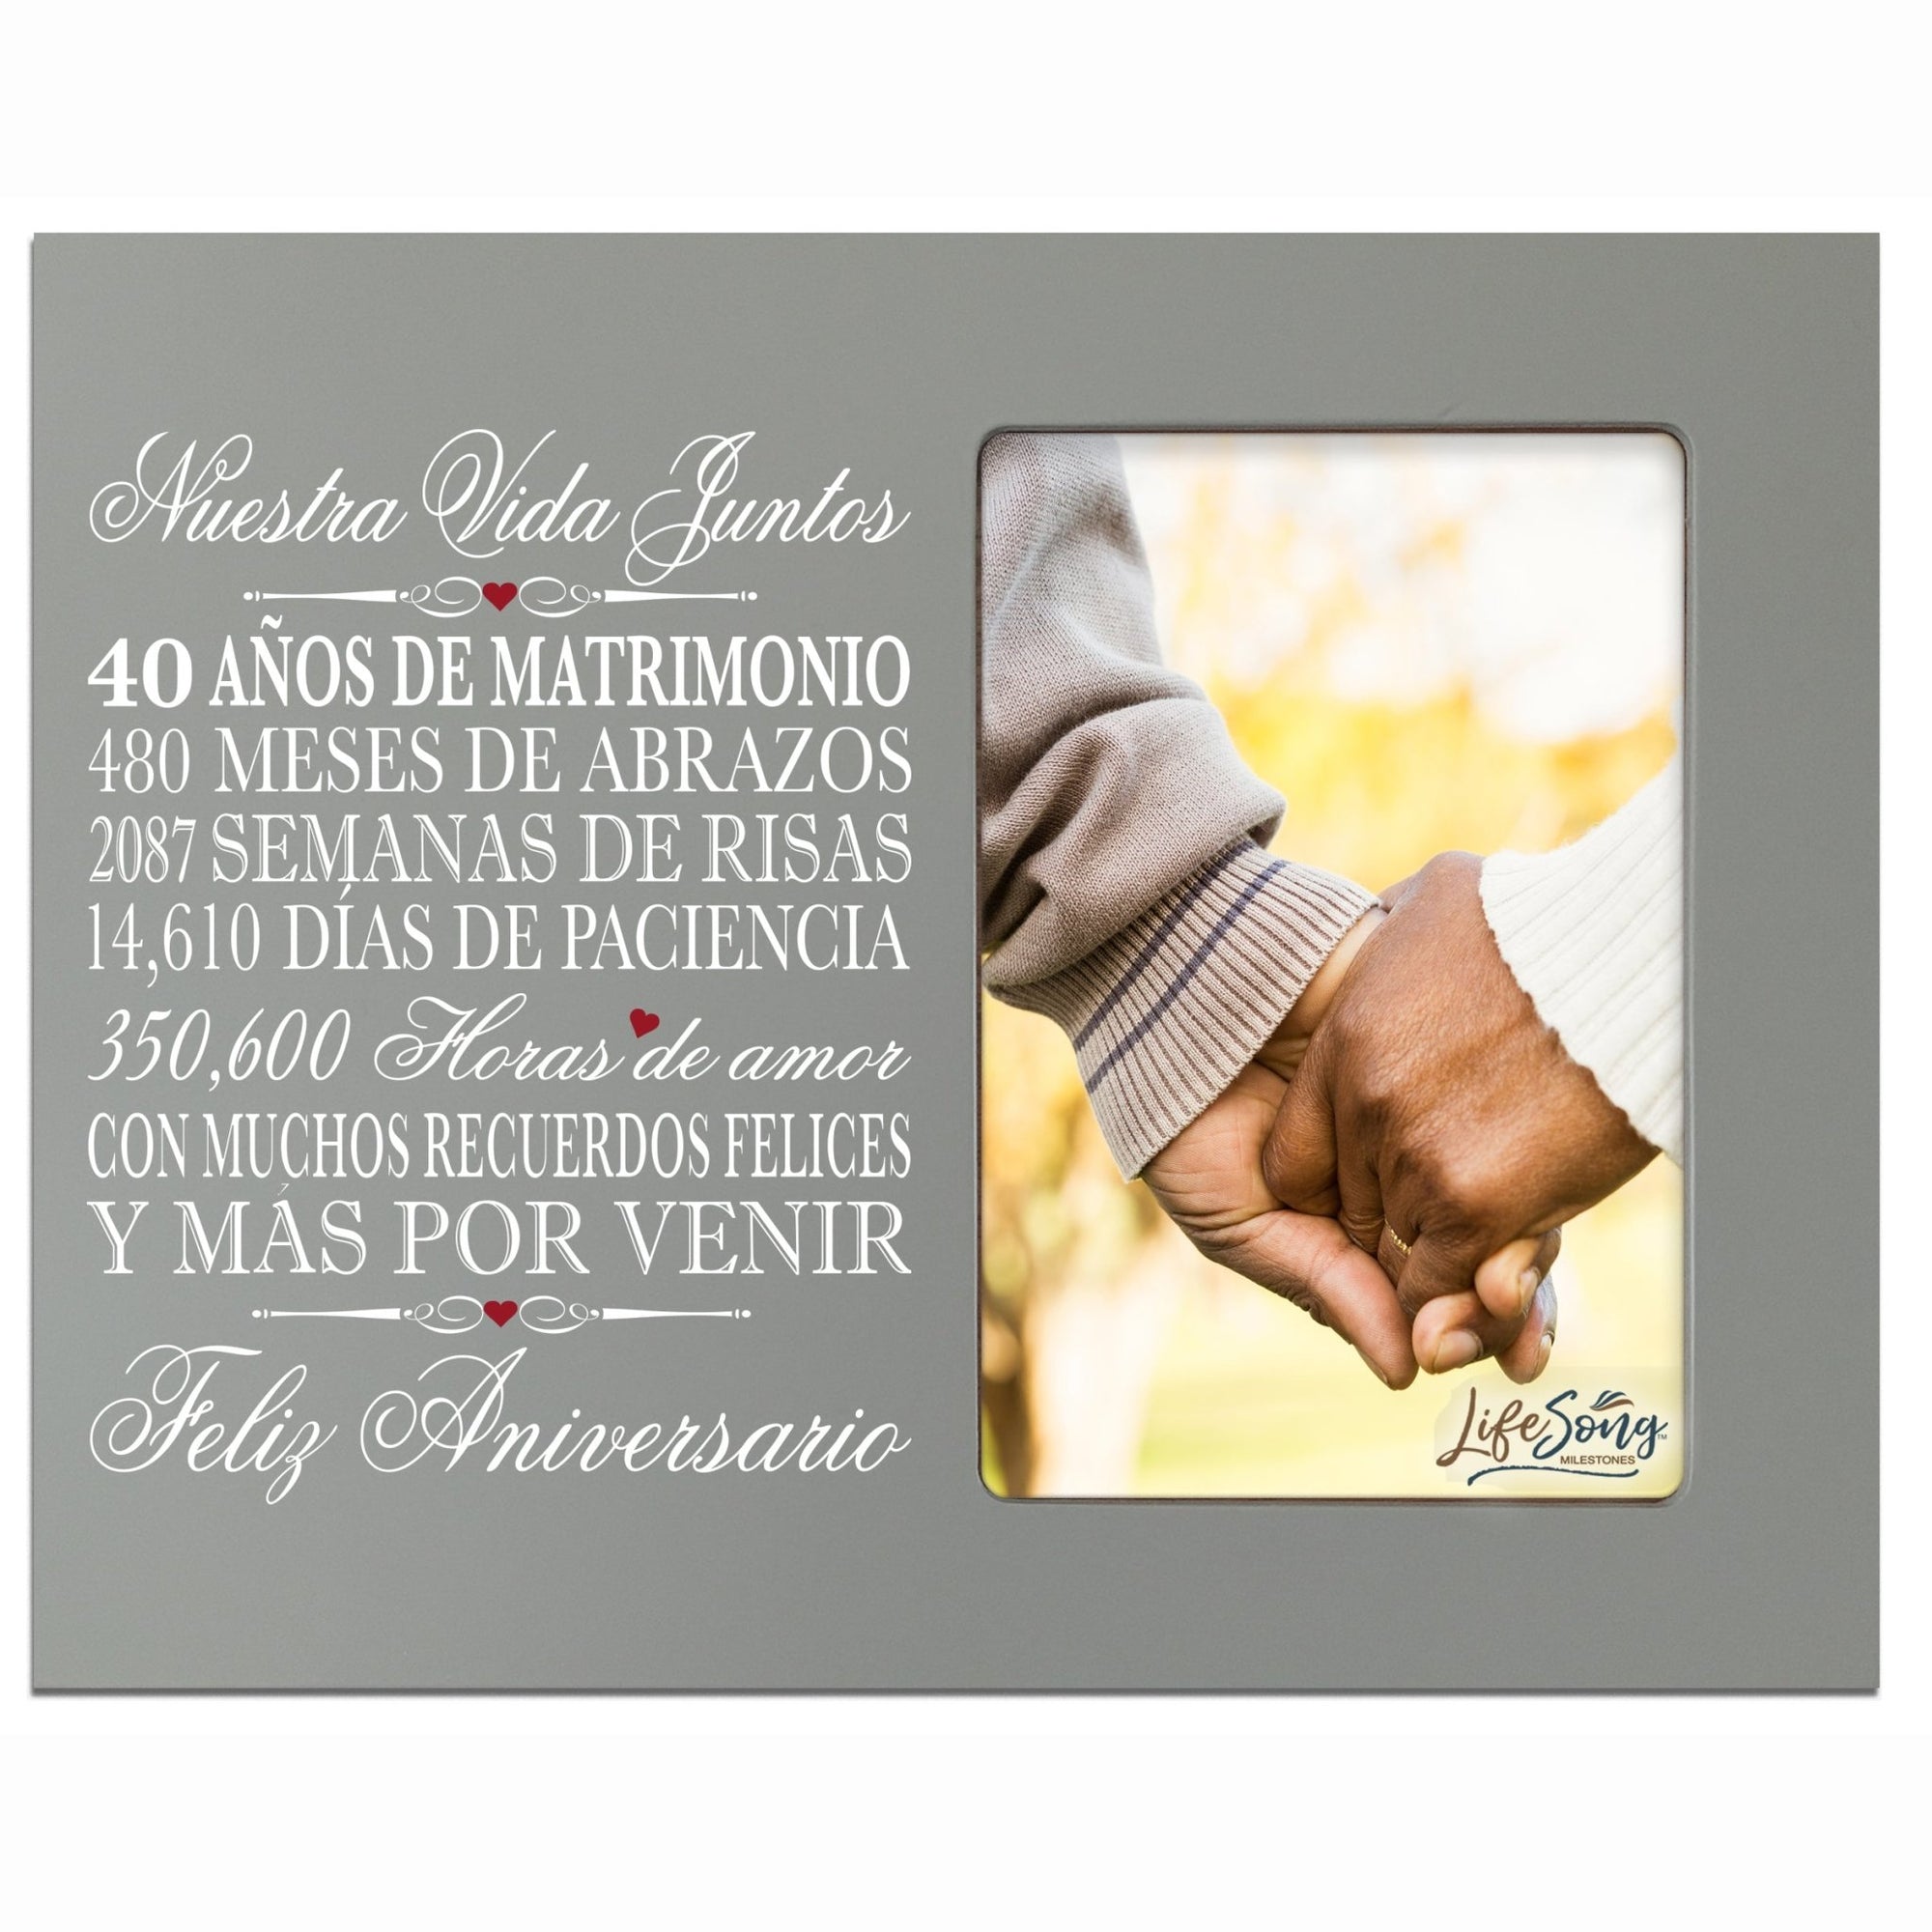 Unique 40th Wedding Anniversary Gift Ideas for Couples – Spanish-themed frame.